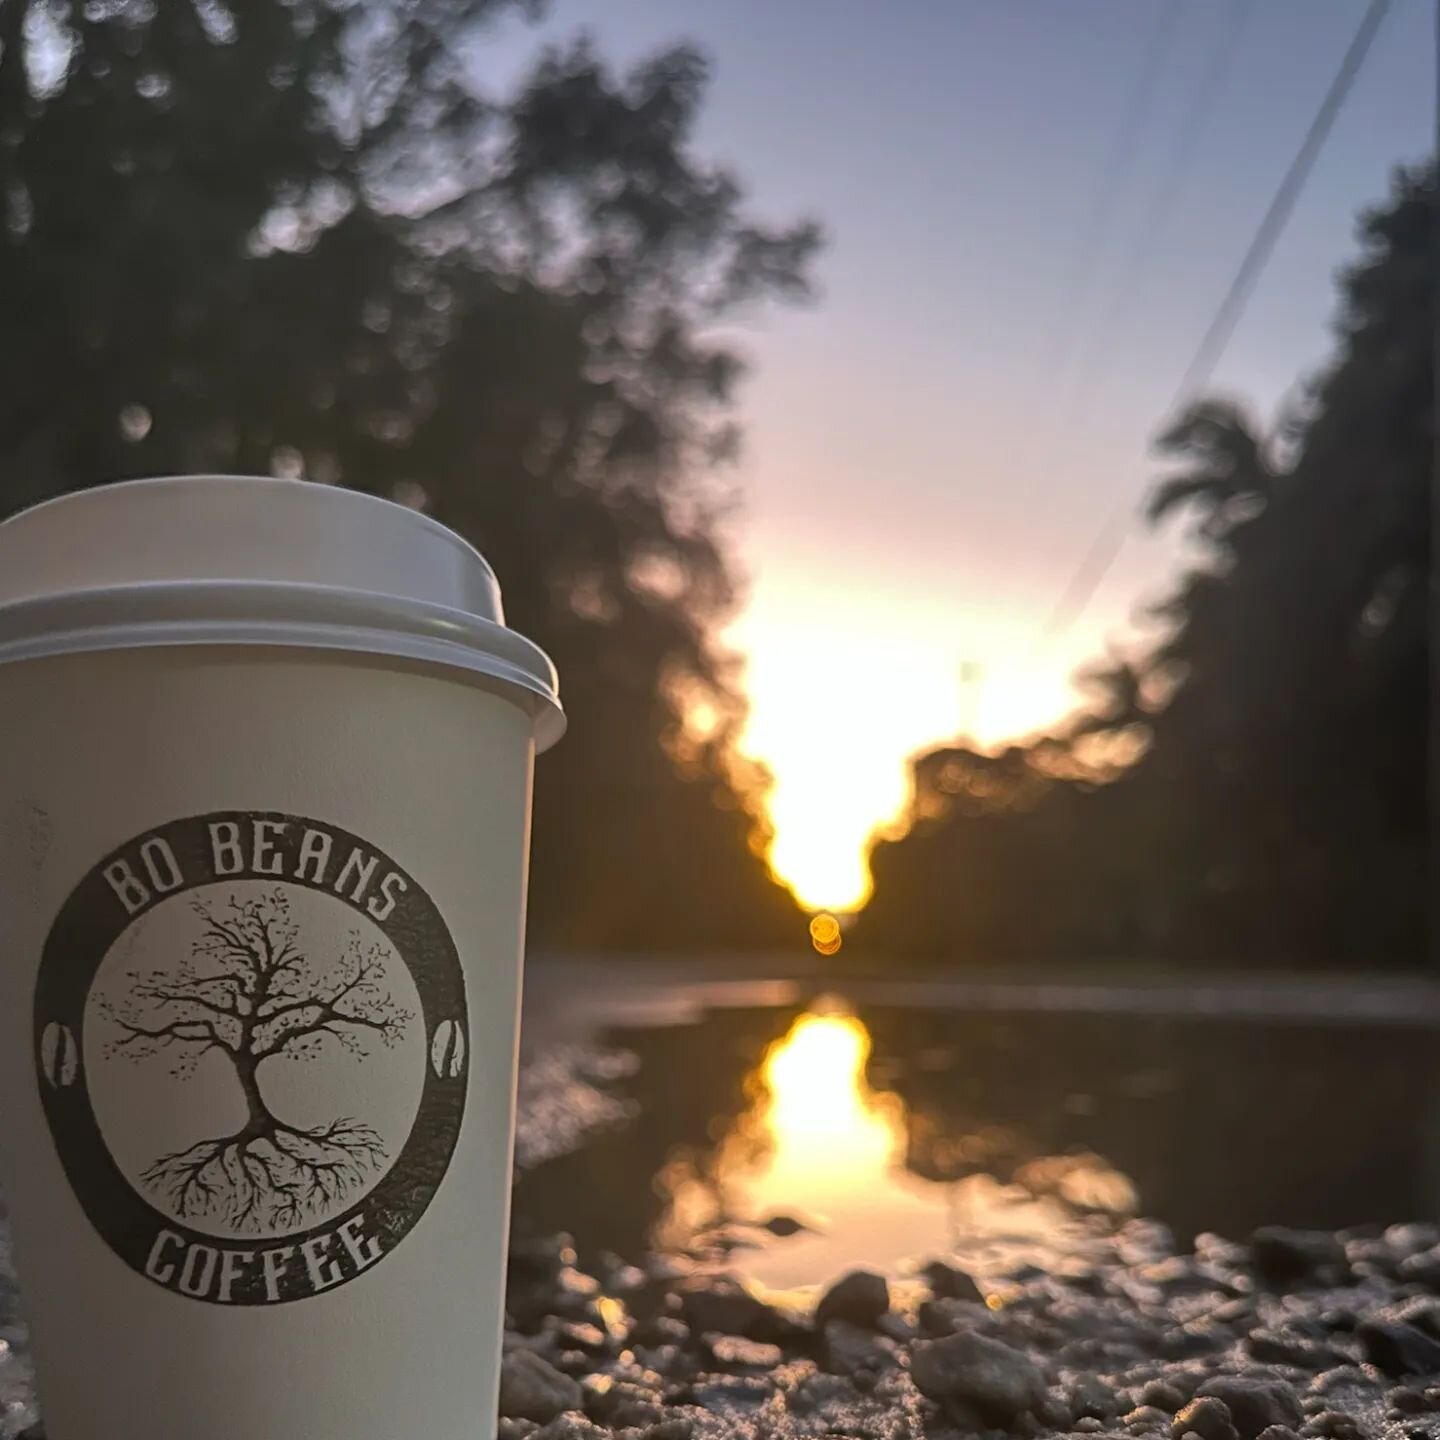 A match made in heaven! 🌅 ☕️ 

Remember, we are open from 6AM every day! Even whilst Bo is enjoying his well deserved break overseas ✈️ 

Come visit us bright and early to grab a warm coffee, and watch the sunrise on these chilly, autumn mornings ❄️